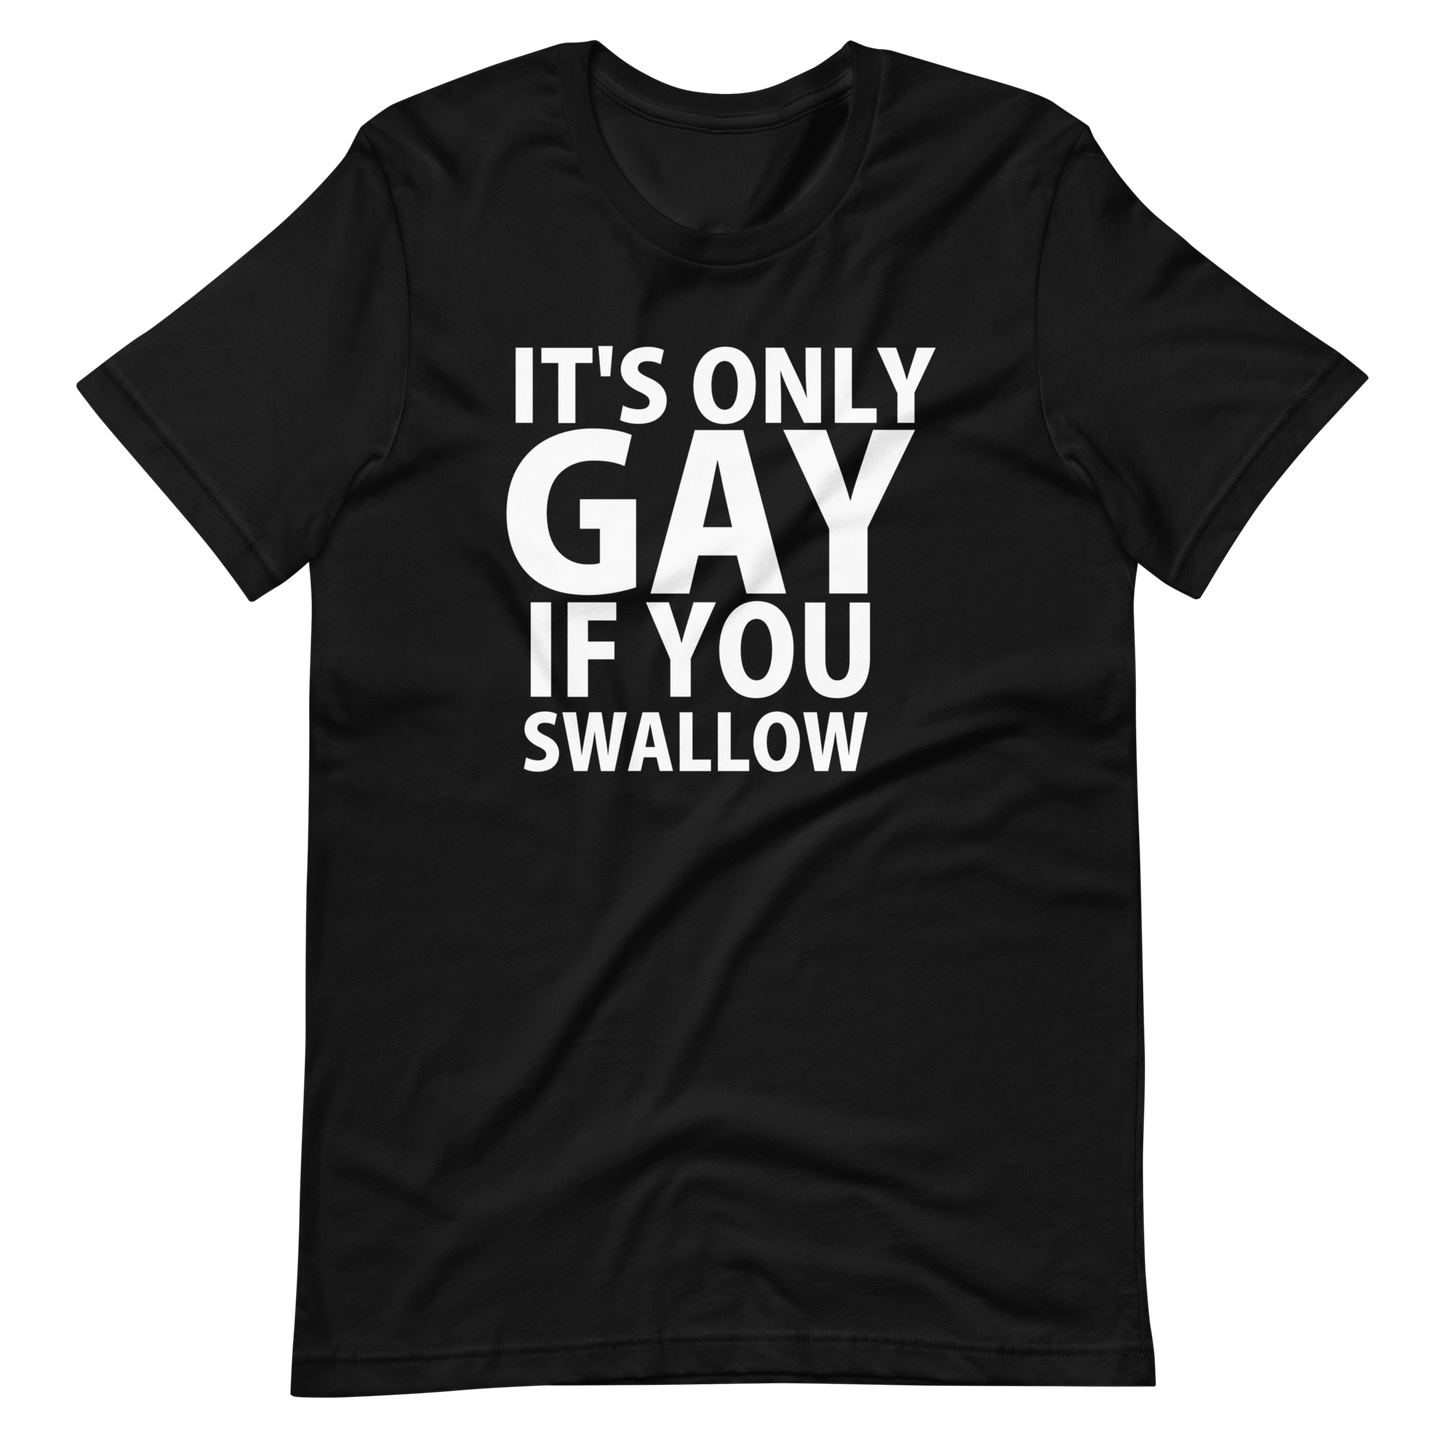 It's Only Gay If You Swallow T-Shirt - Black